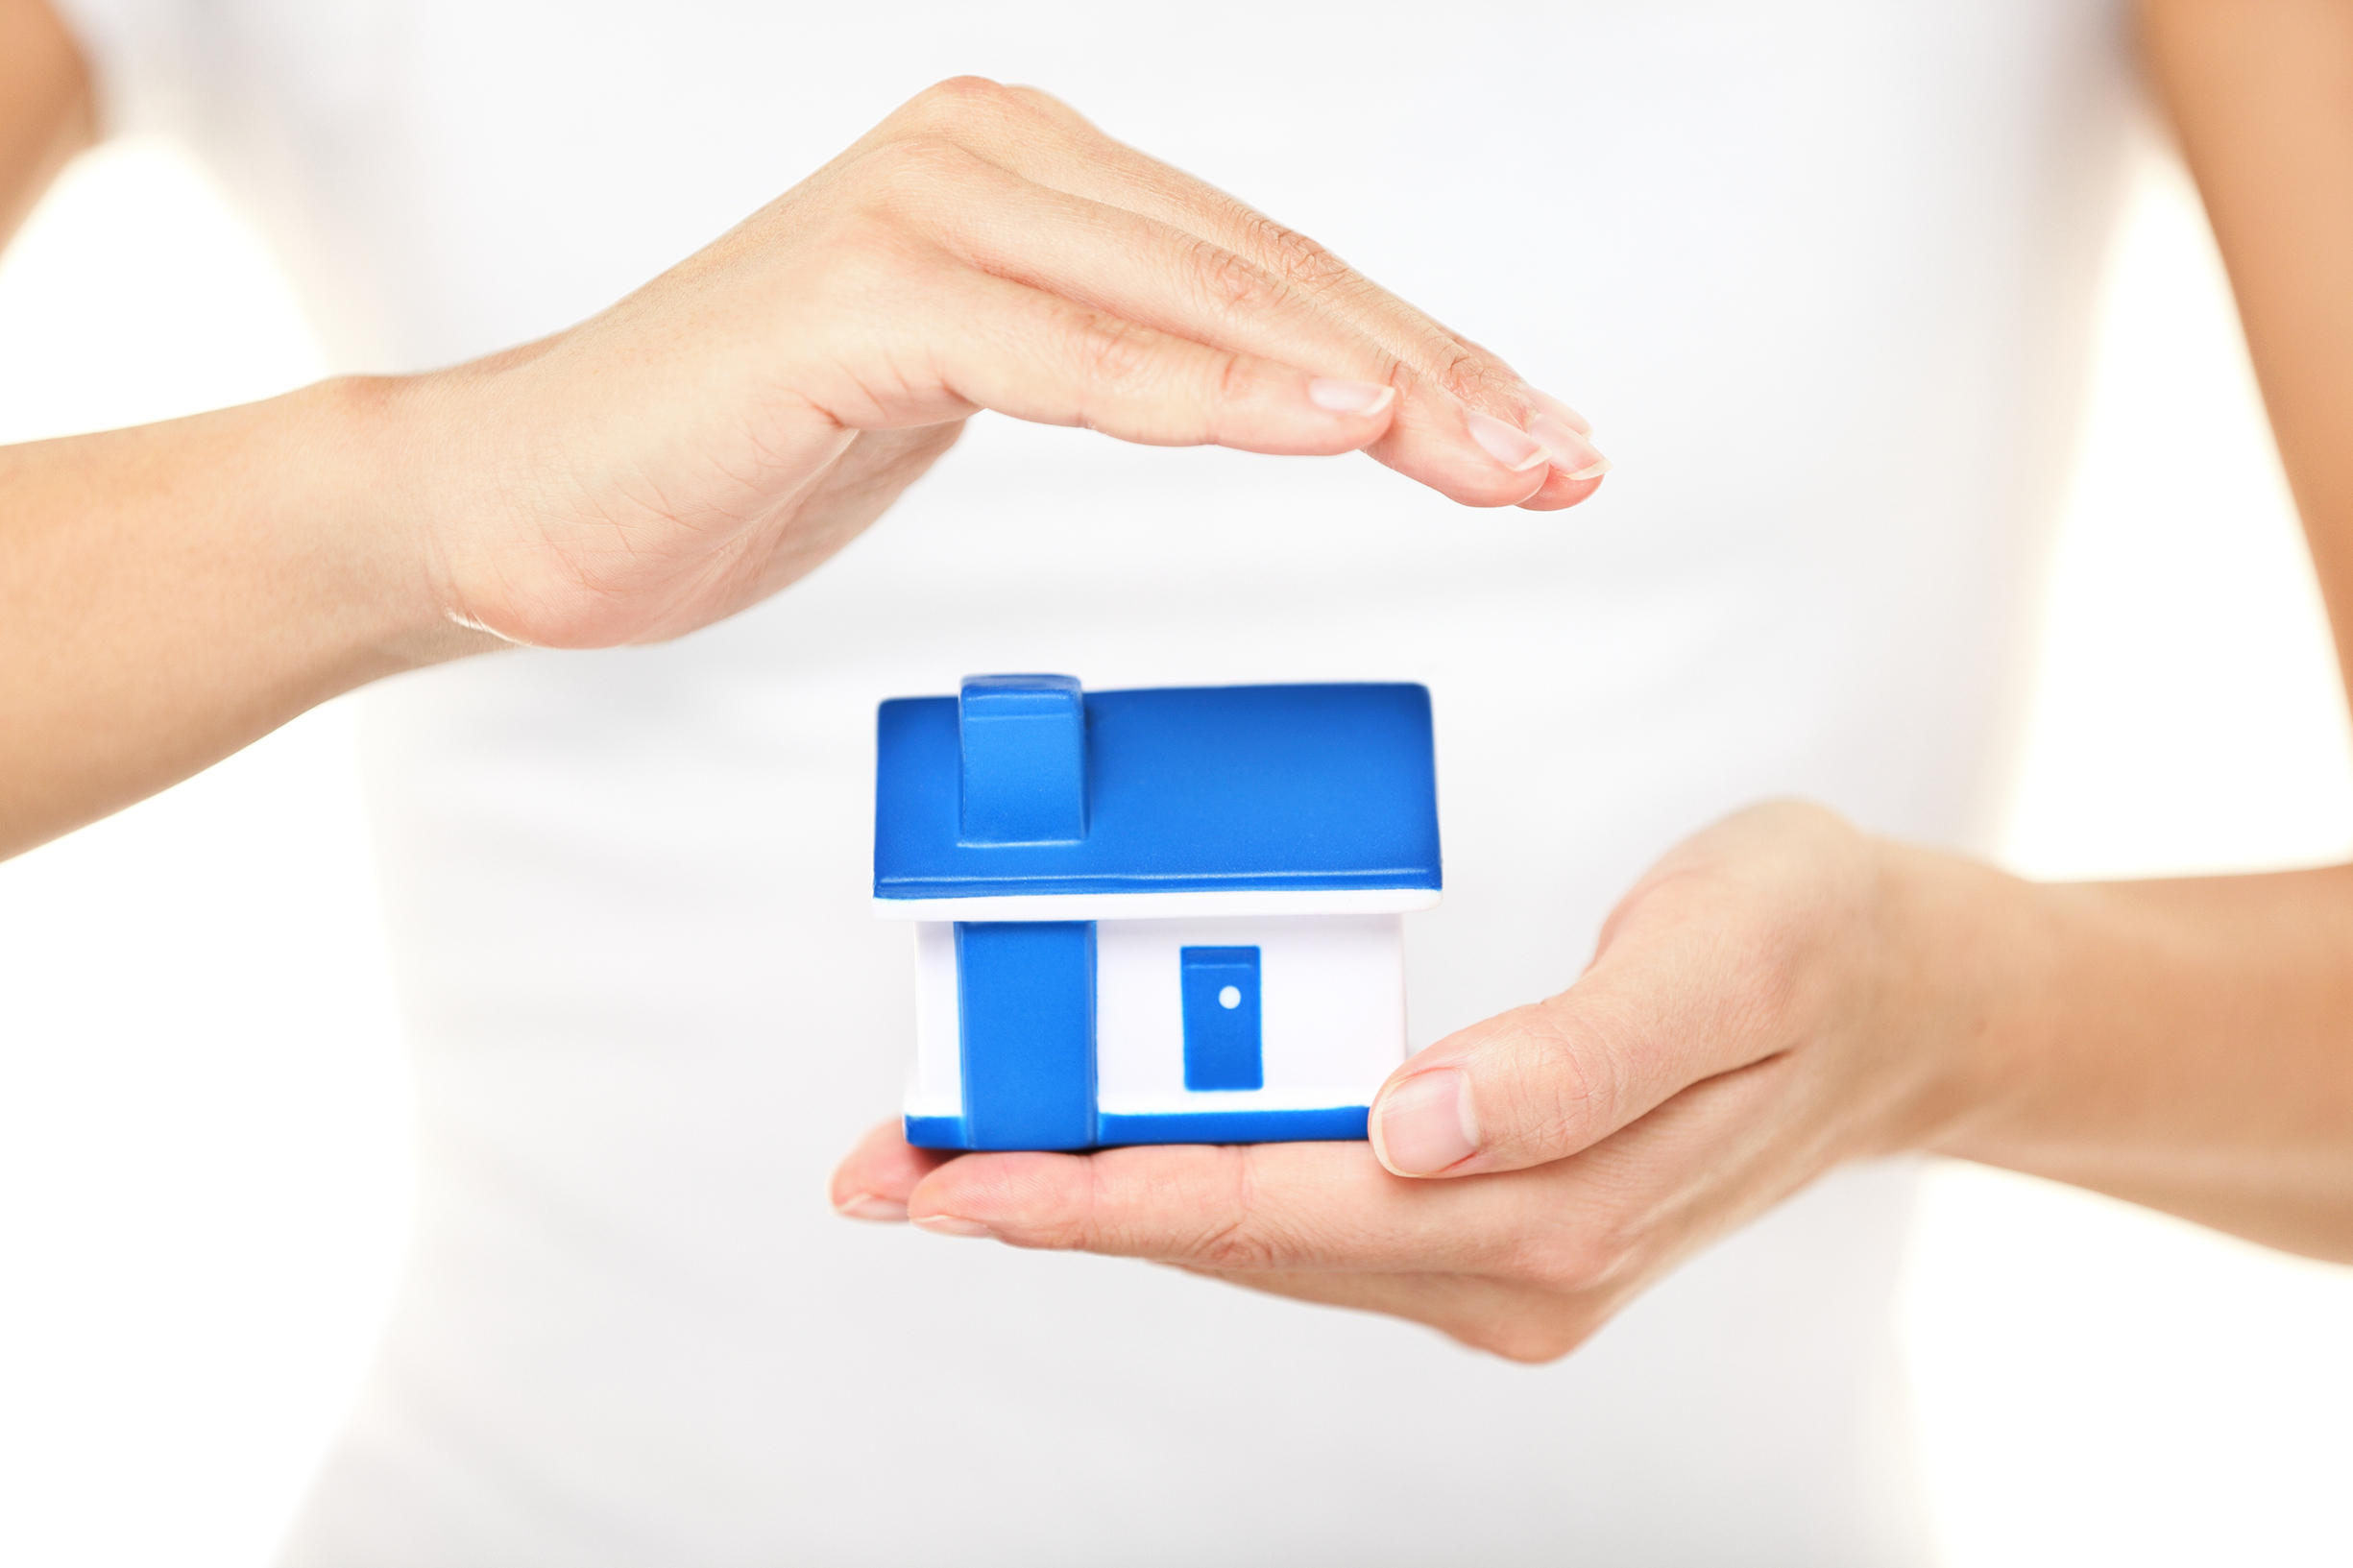 Home insurance. Woman holding a model house in one hand while forming a protective covering with the other conceptual of home insurance and protection